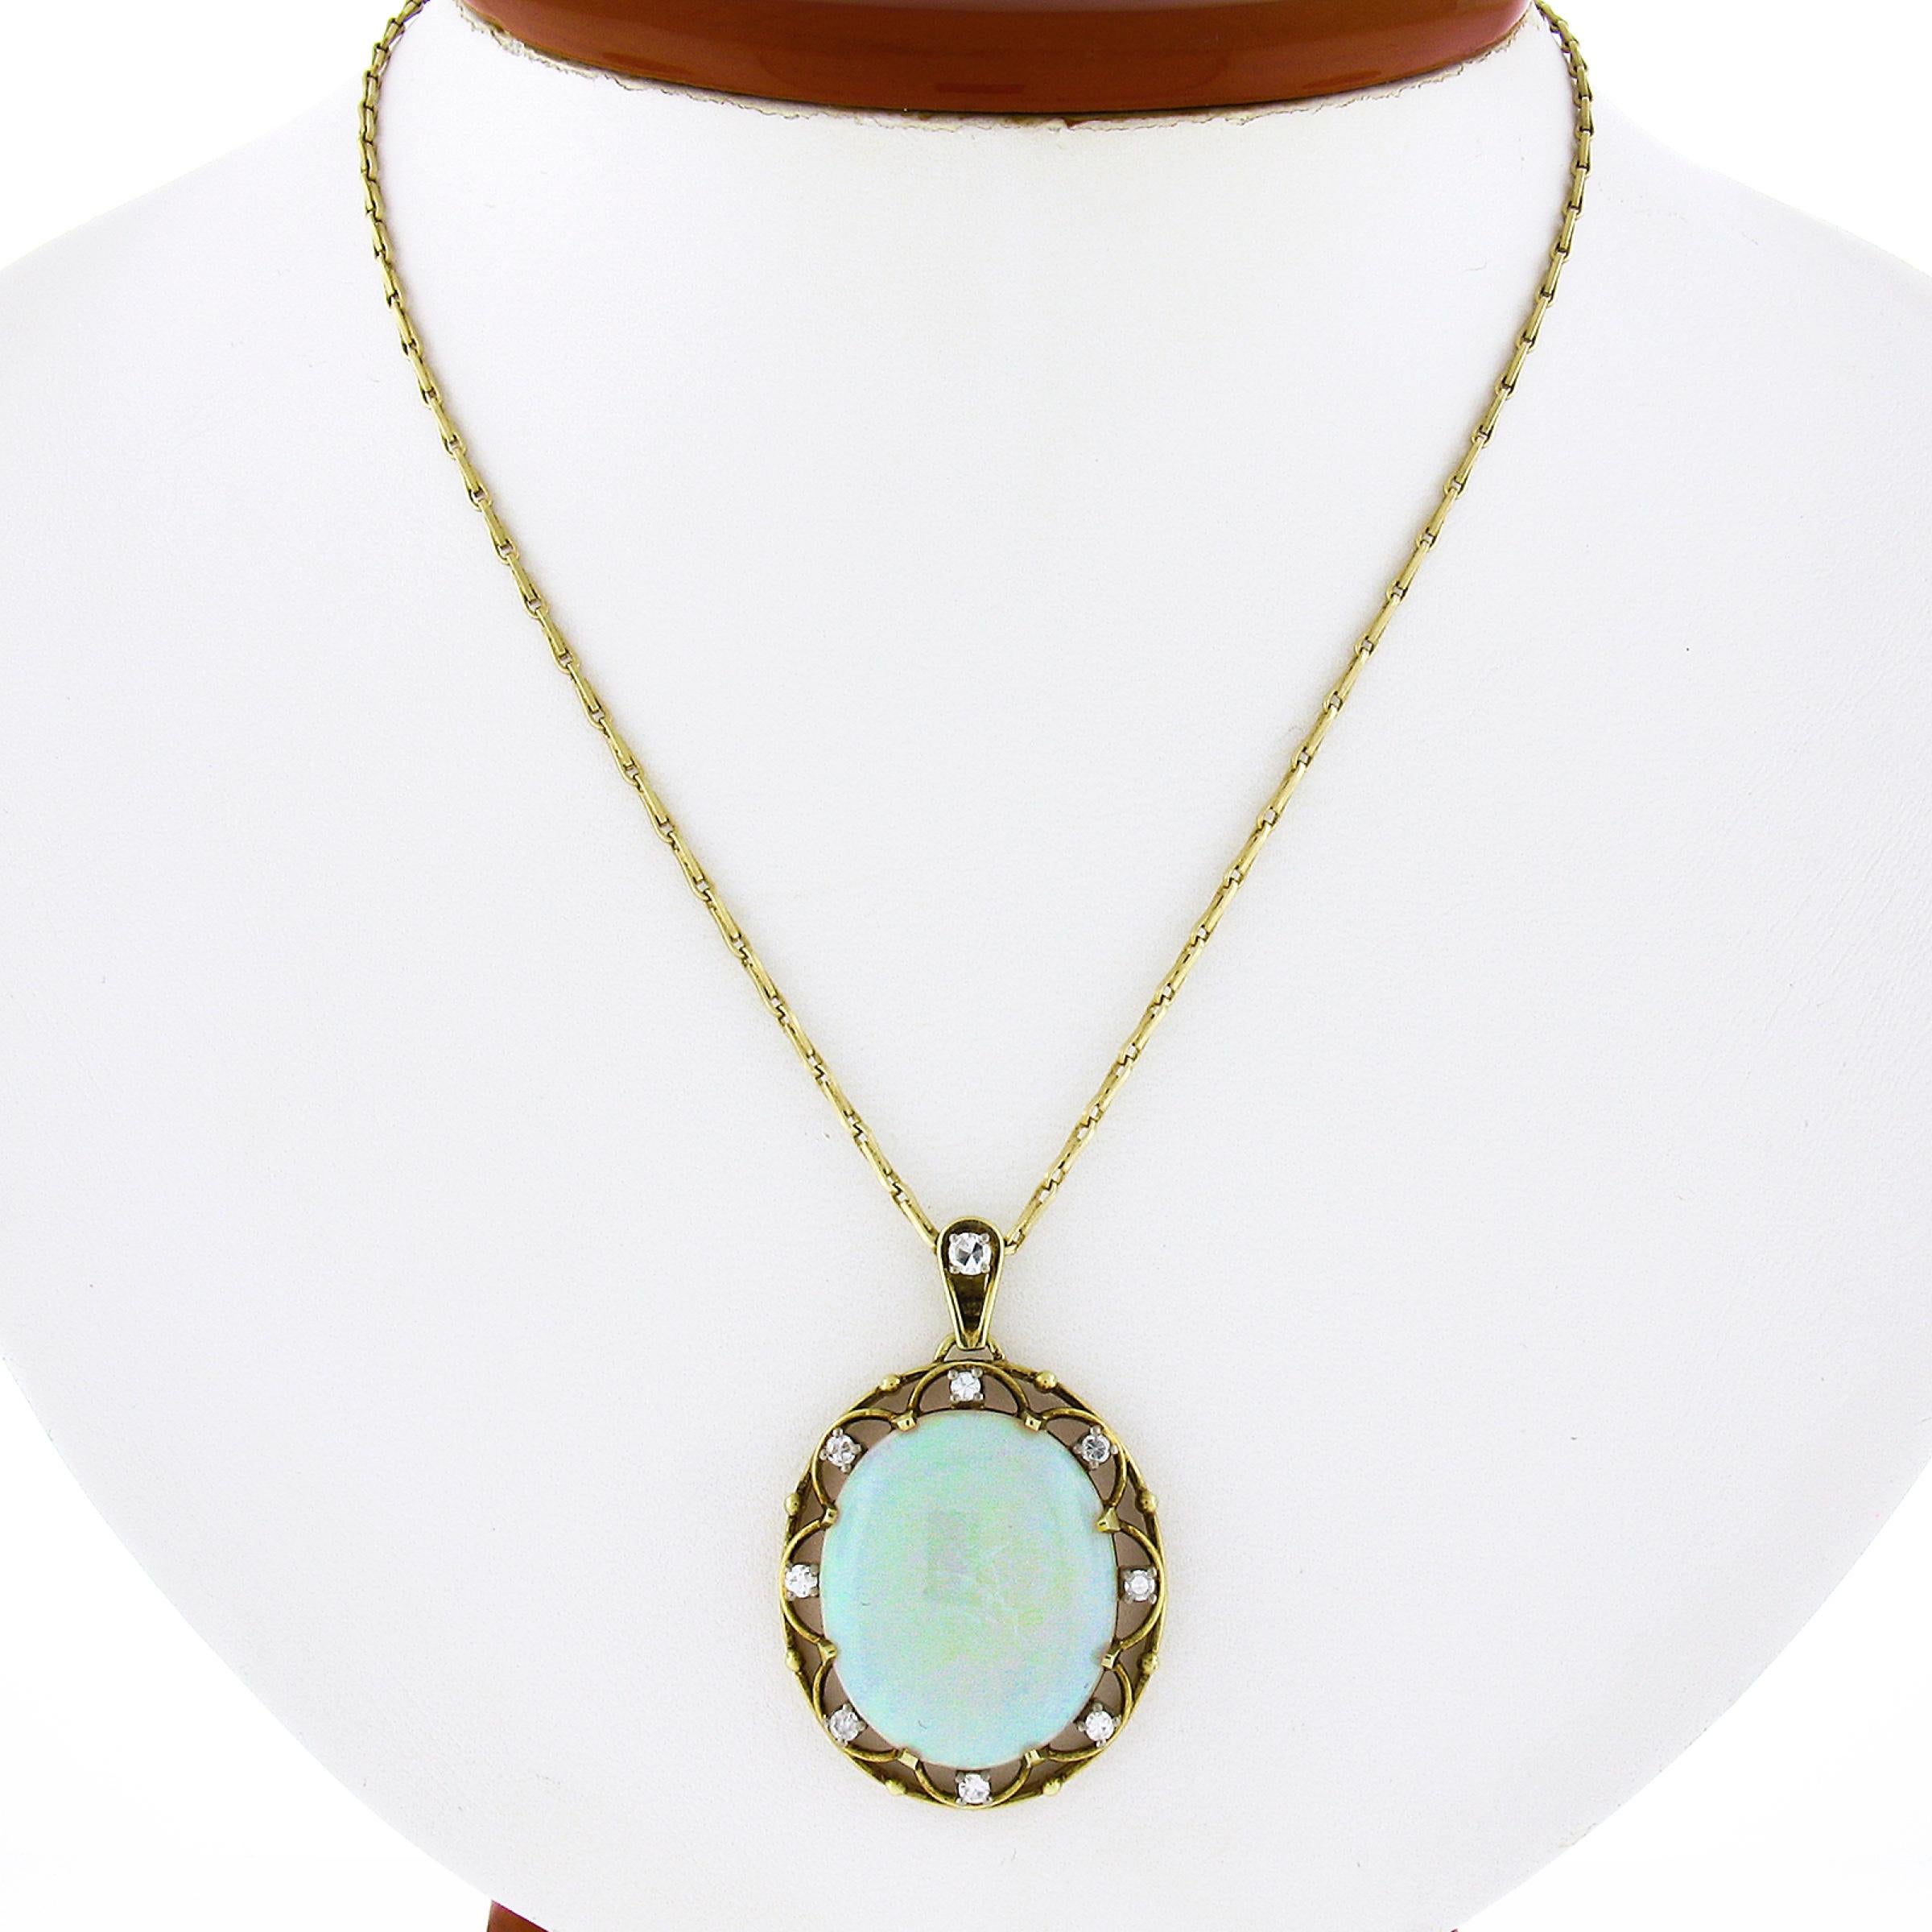 This vintage pendant is crafted in solid 14k yellow gold and features a beautiful open work design. The pendant is prong set with an oval cabochon opal that displays lovely white base color with green, blue and orange play of color throughout. The